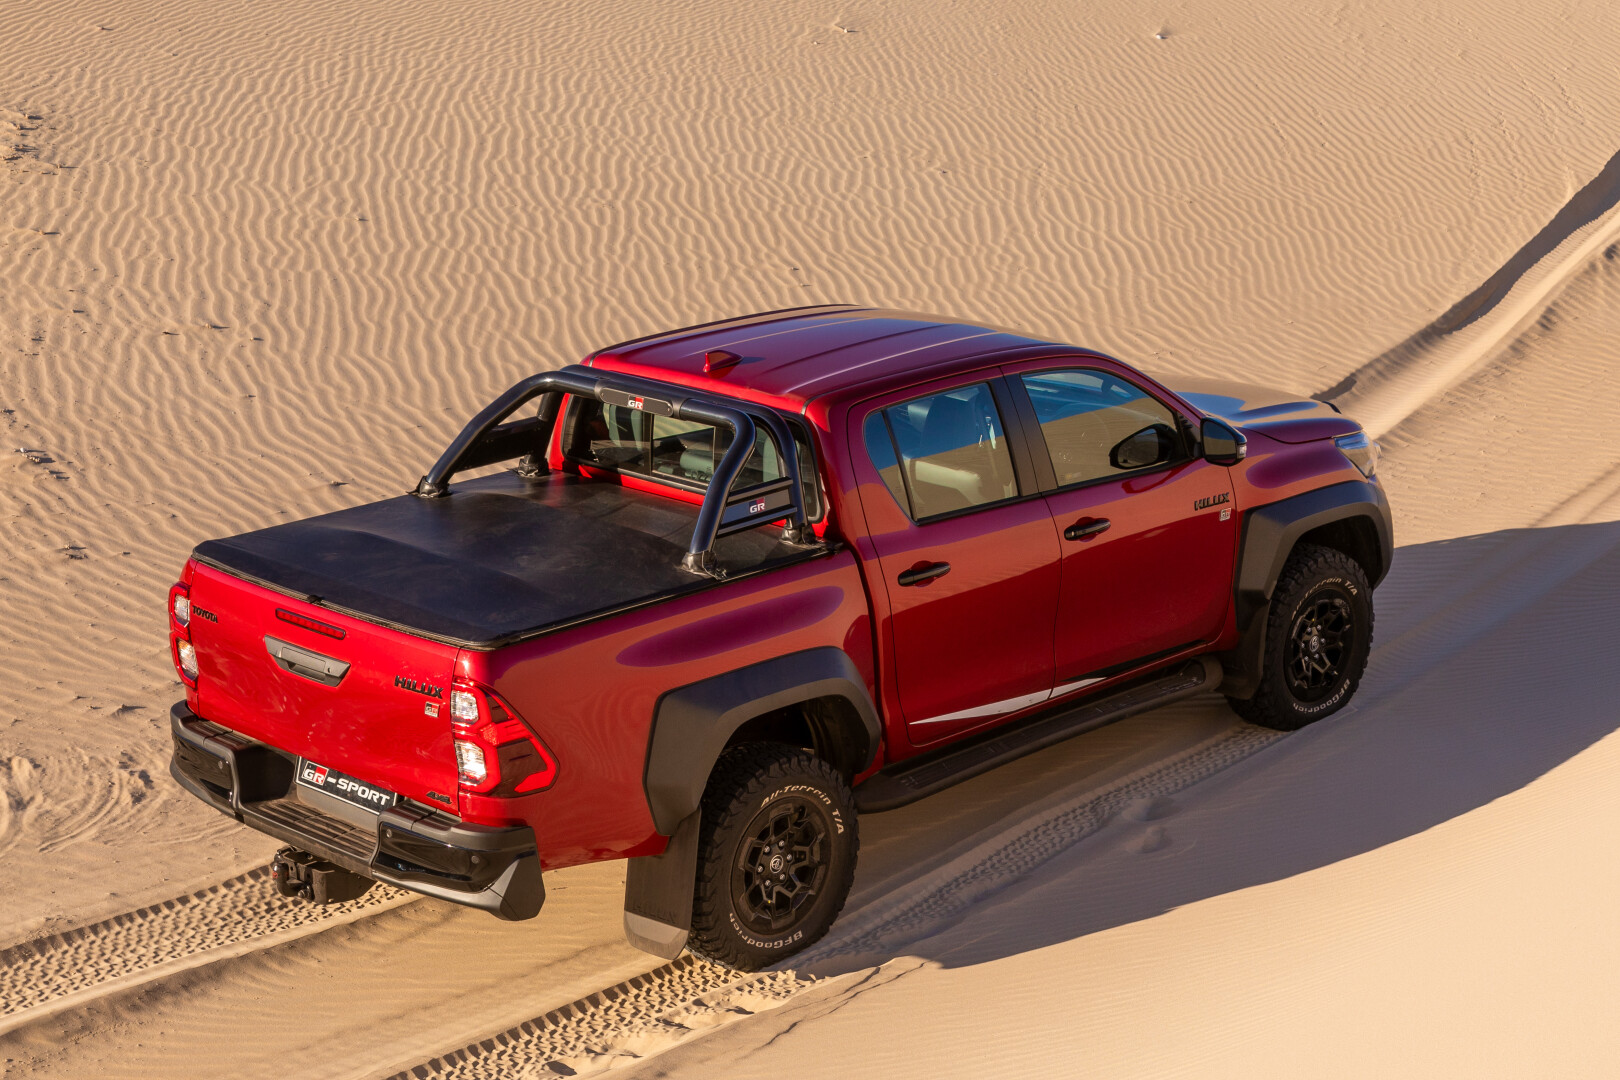 Toyota Hilux GR-S II rear view on sand dune